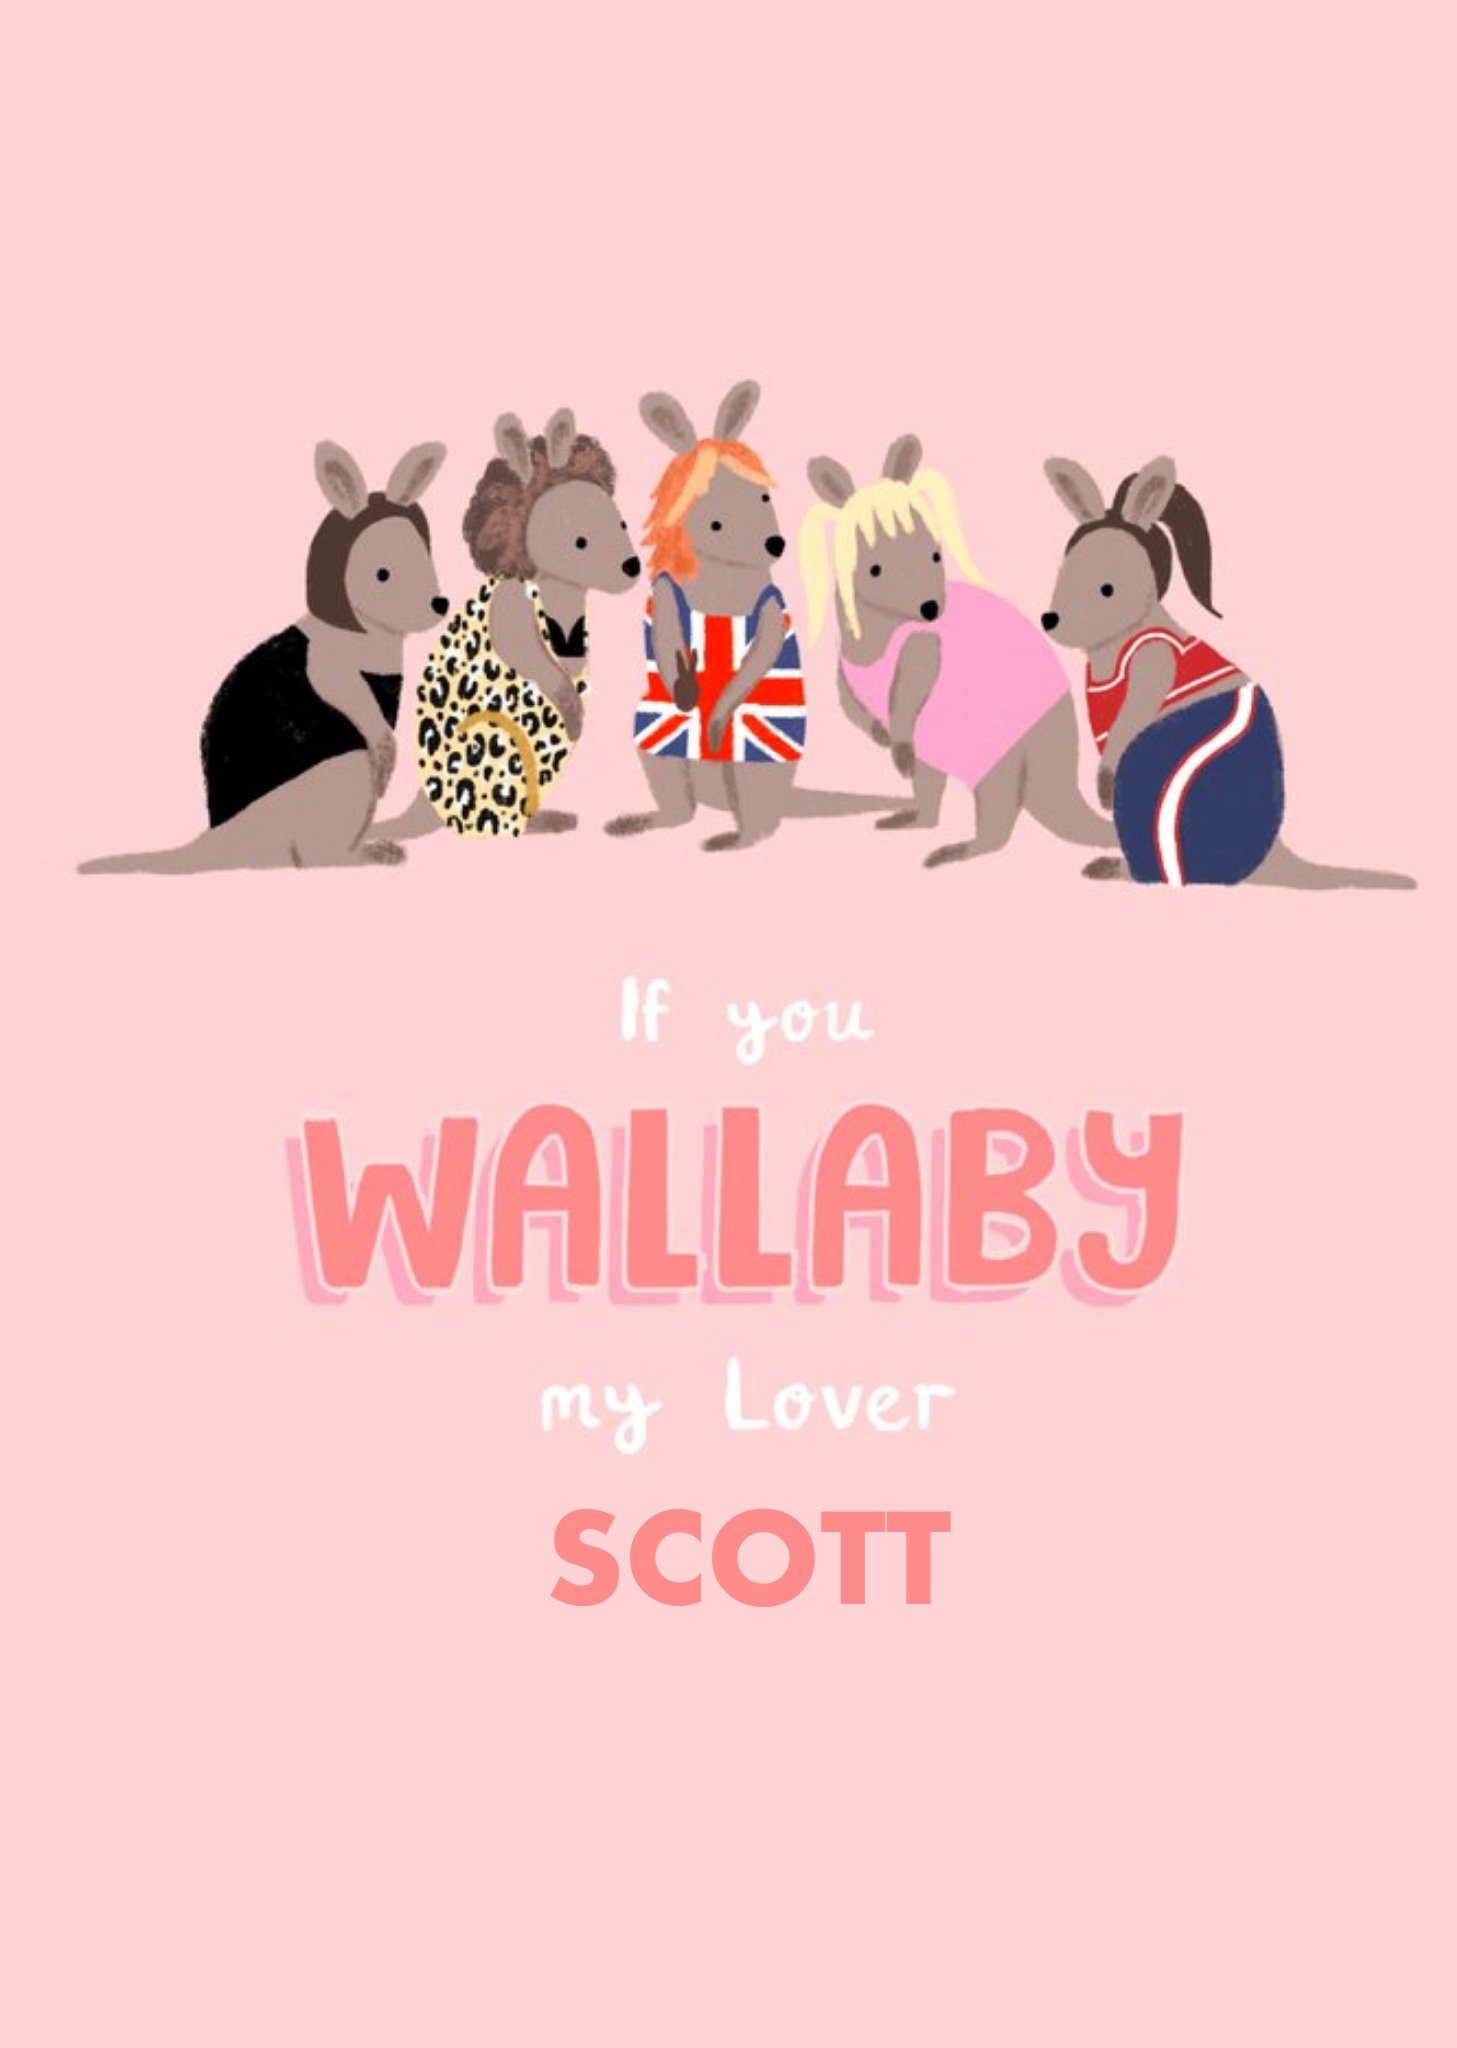 Moonpig Millicent Venton Customisable Illustrated Wallaby Pun Valentine's Day Card Ecard